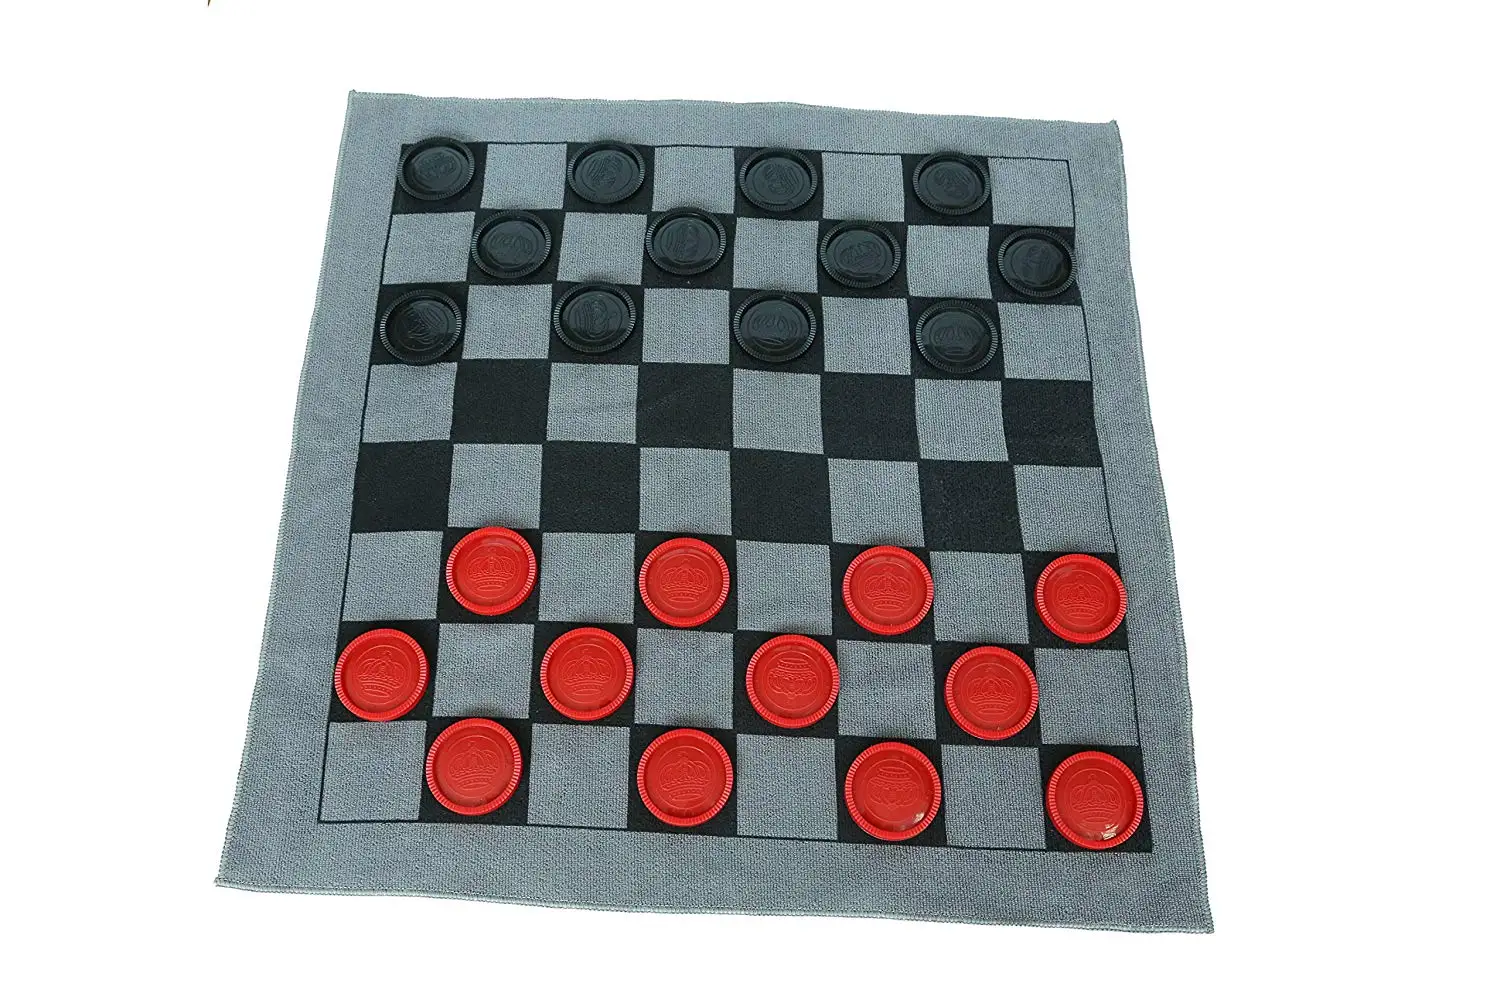 Checkers 10. 8717775442424 BS giant Checkers.